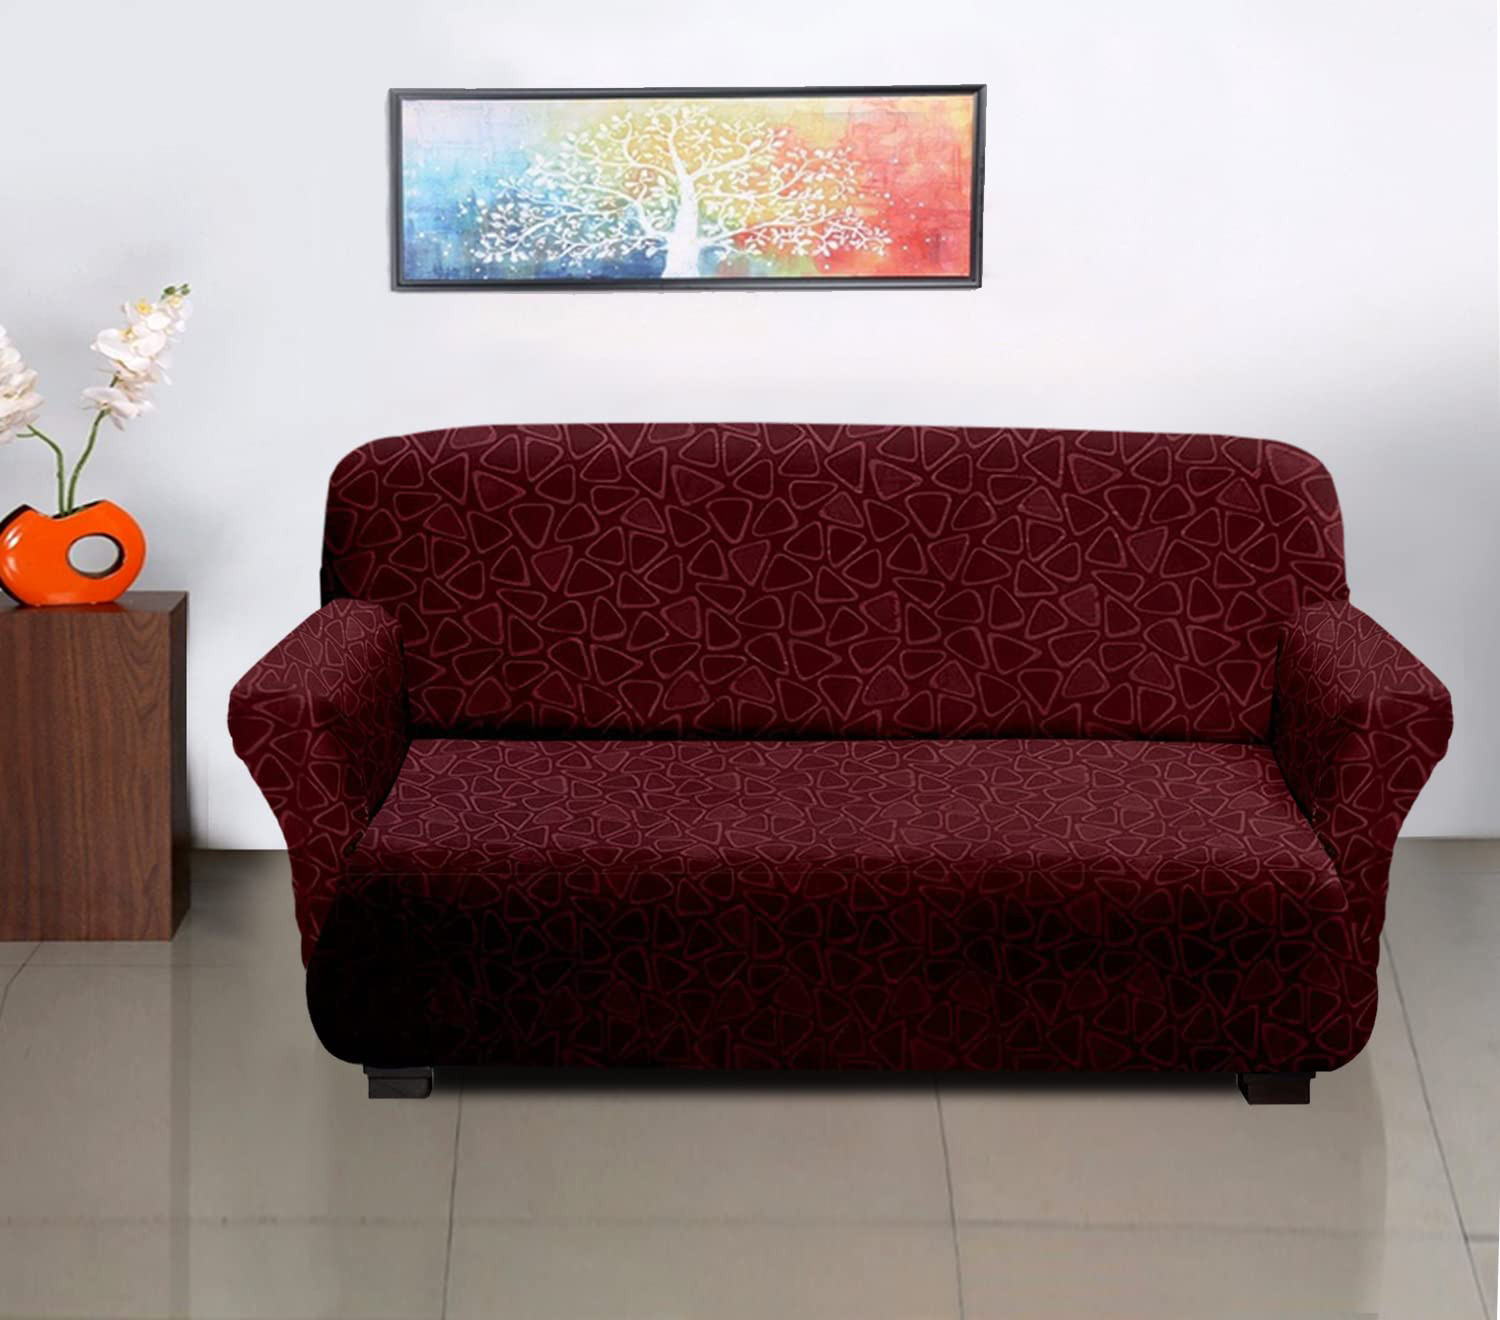 Kuber Industries Premium Two-Seater Comfort Sofa Cover|Triangle Design Polyester Couch Cover|Stretchy Sofa Slipcovers With Foam Sticks (Maroon)